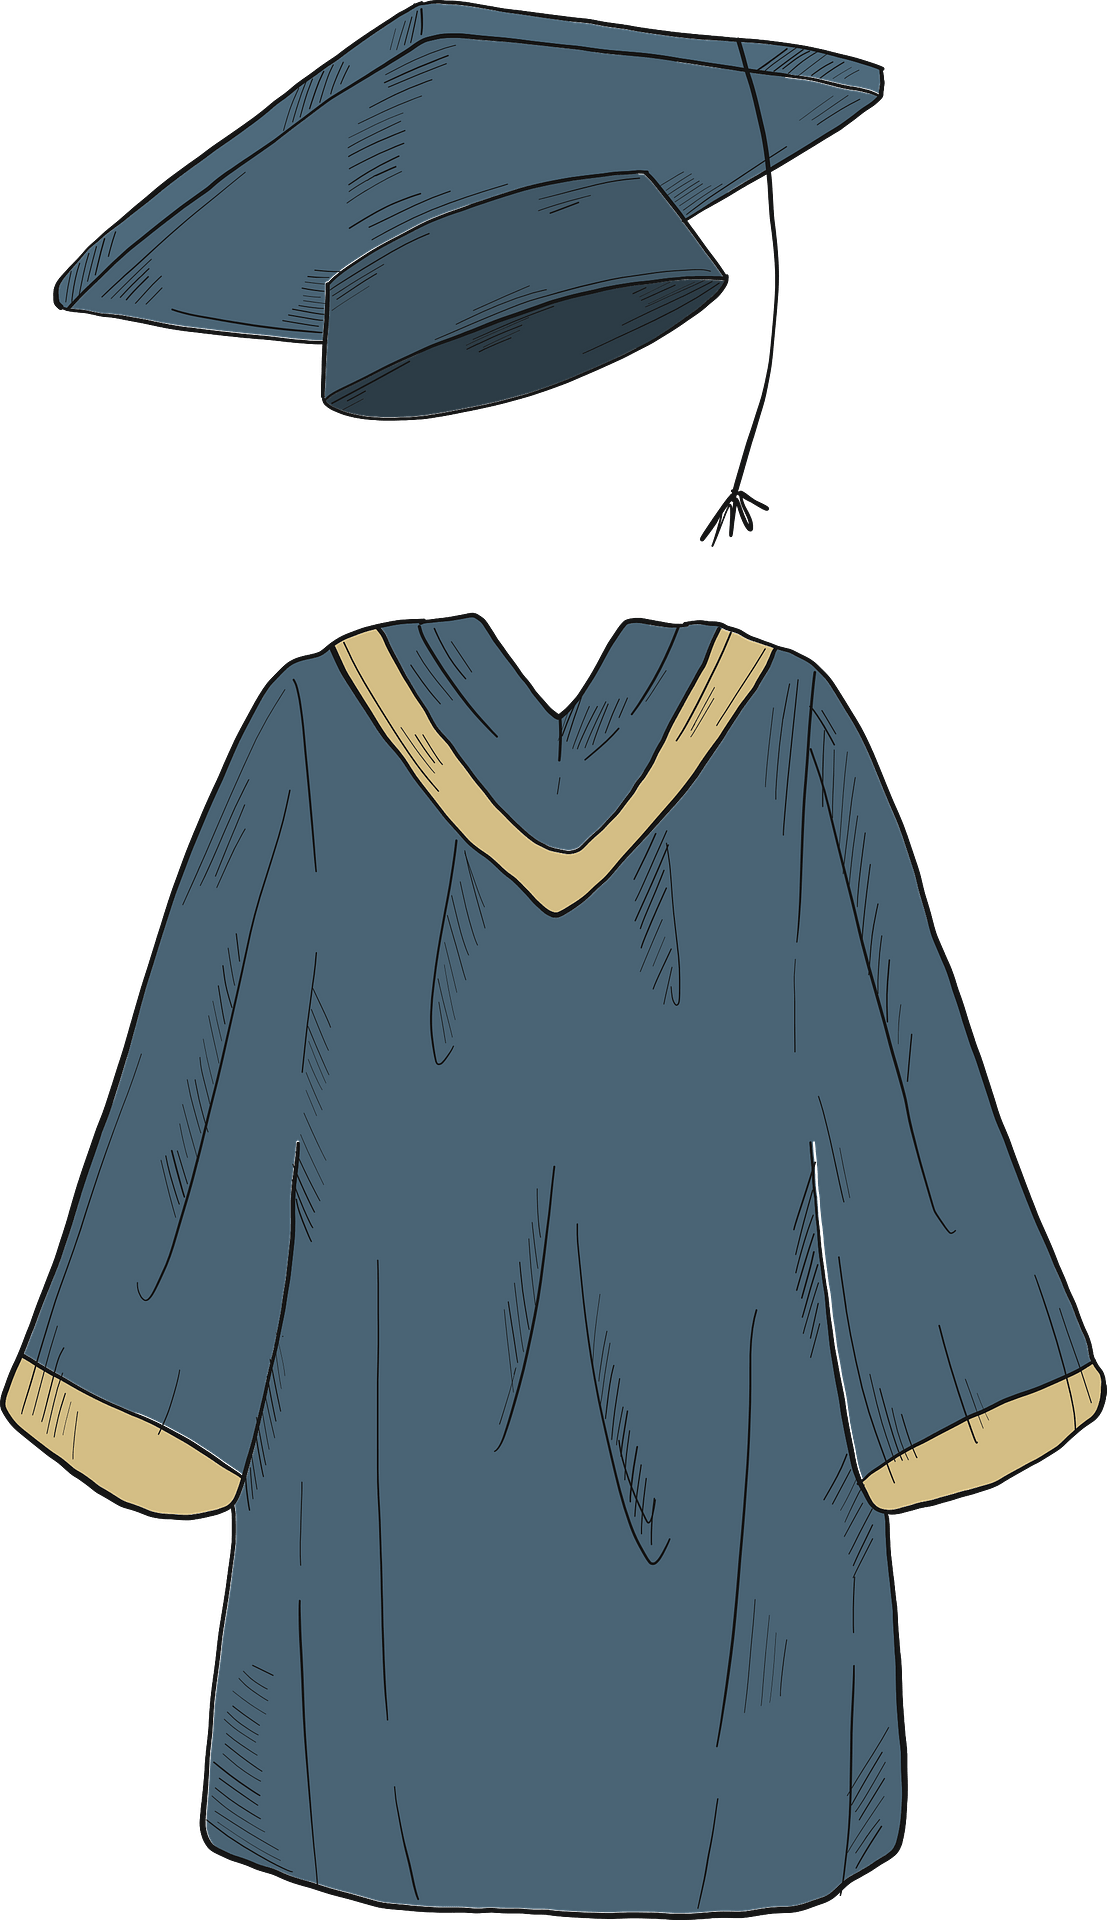 A woman in a graduation gown and cap · Free Stock Photo